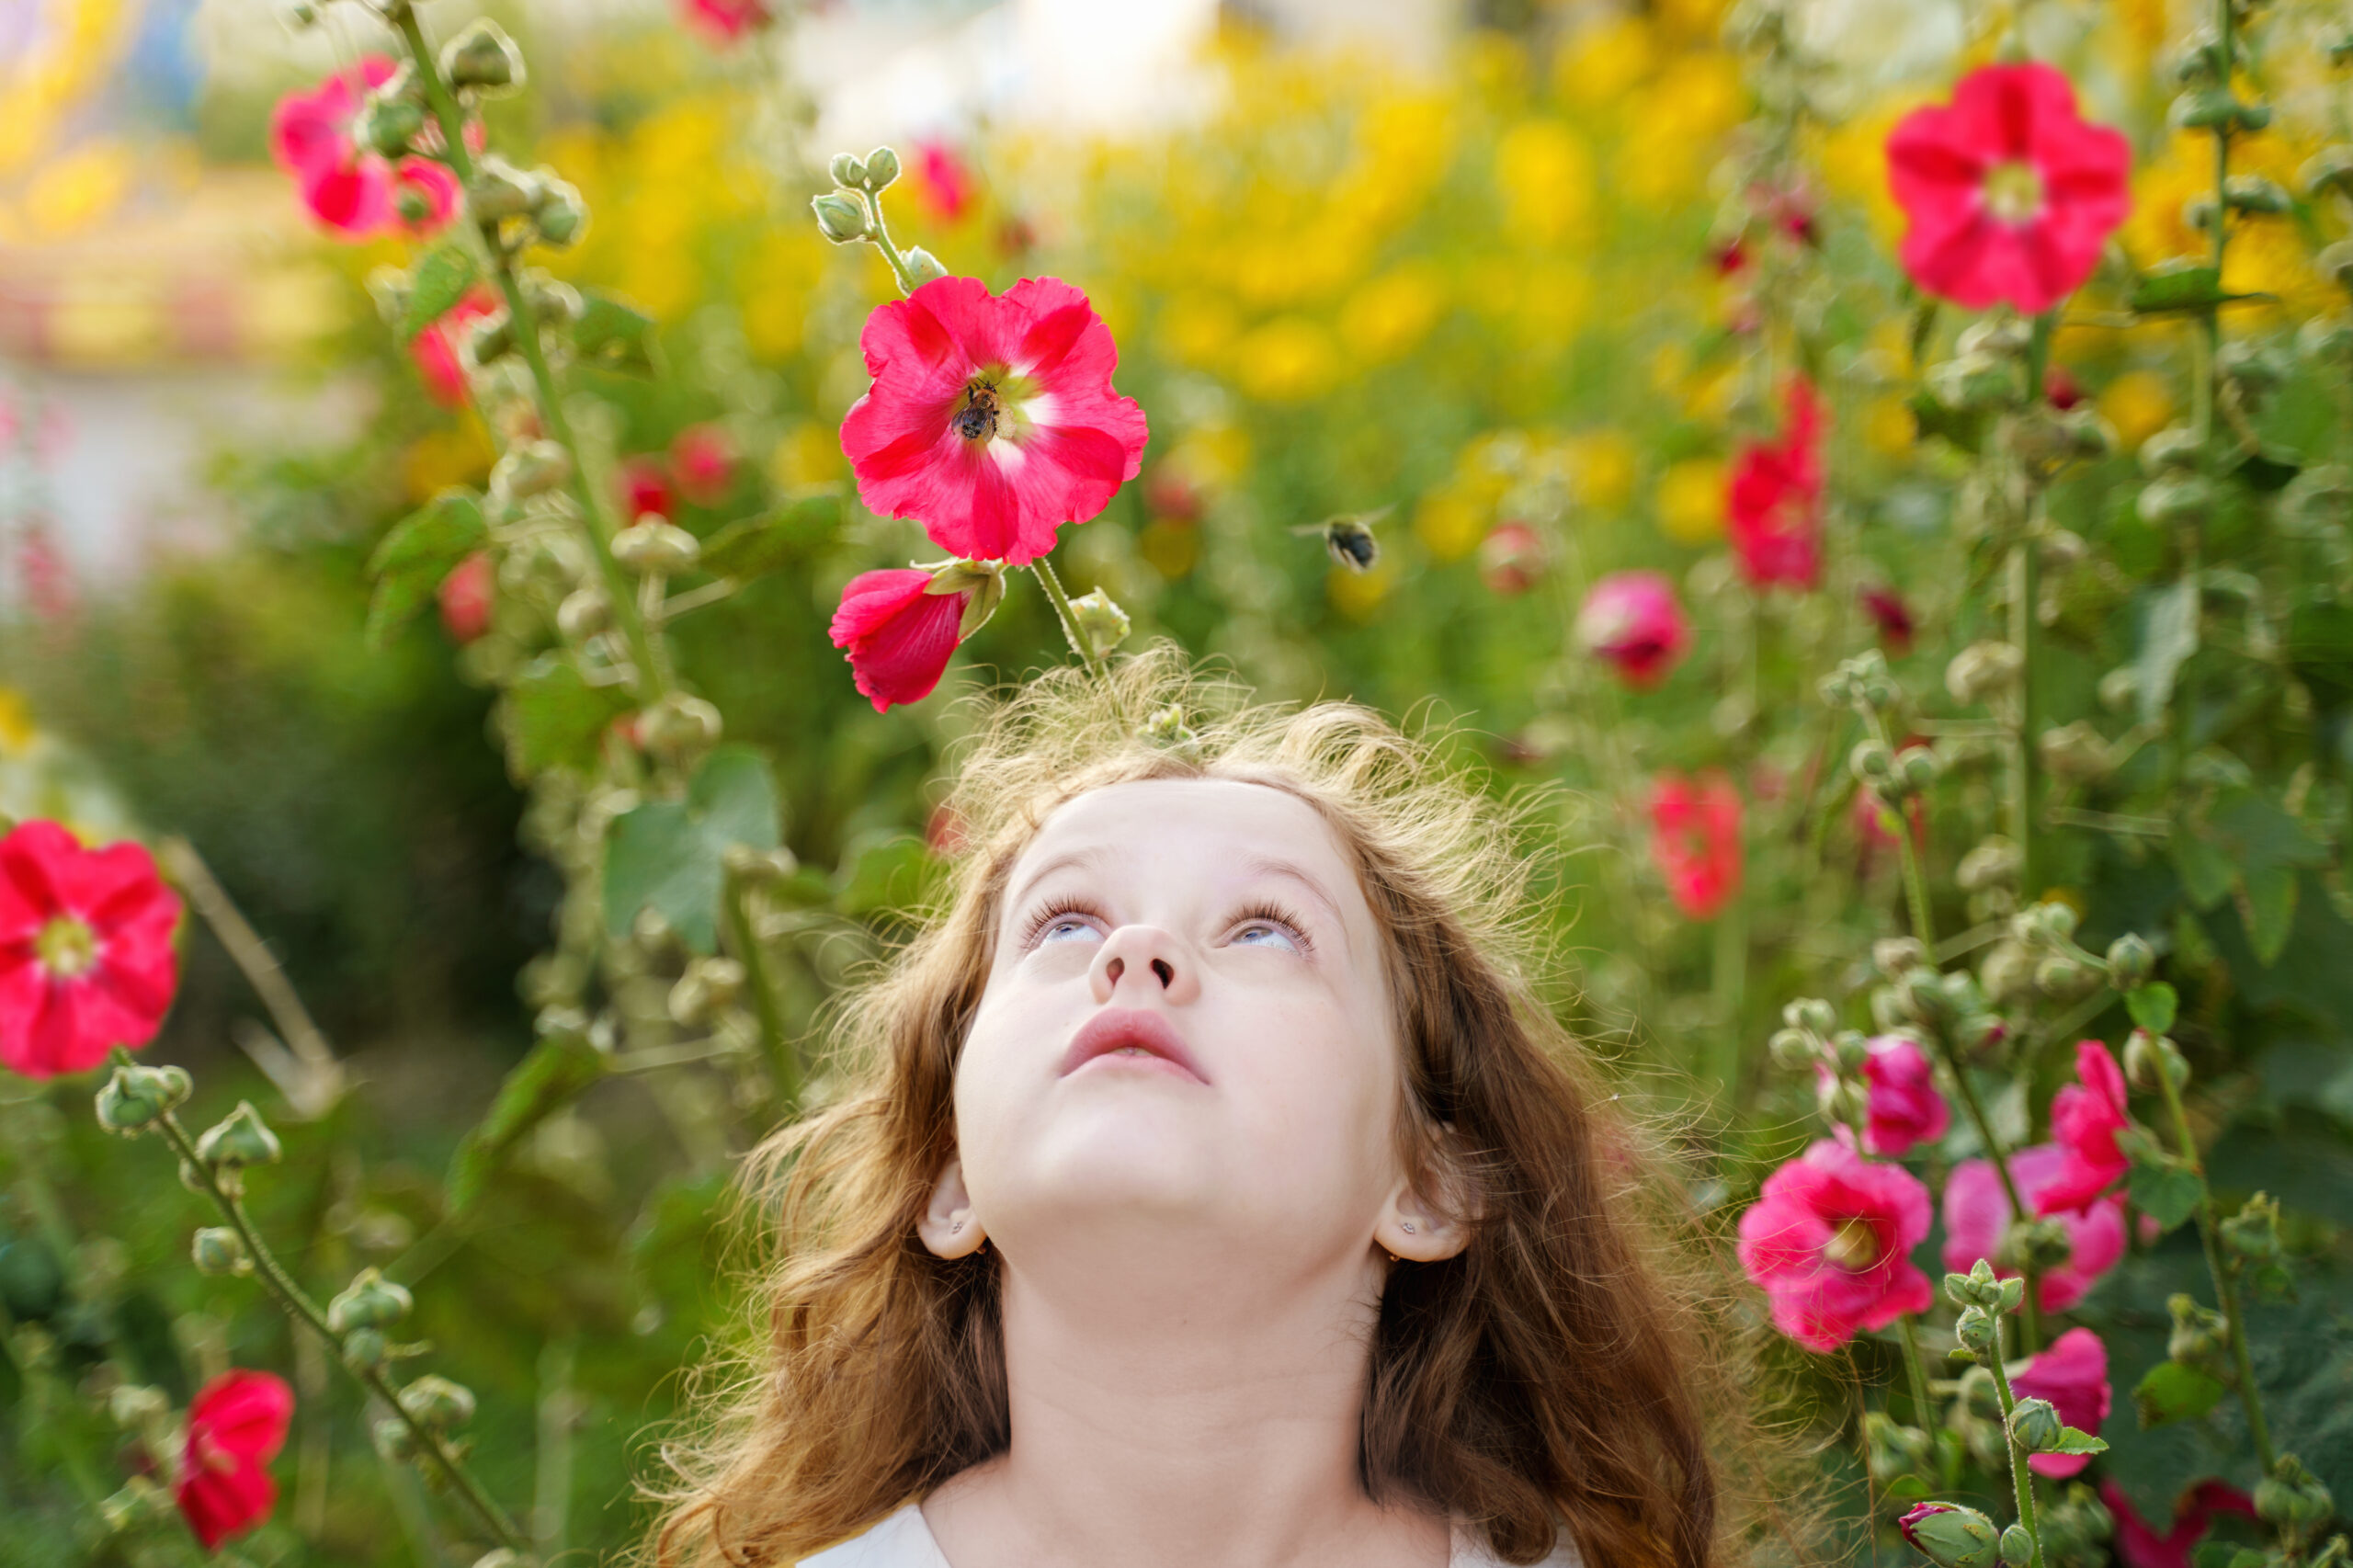 Little girl is looking up at the bee. Facial emotions of fear, fright.